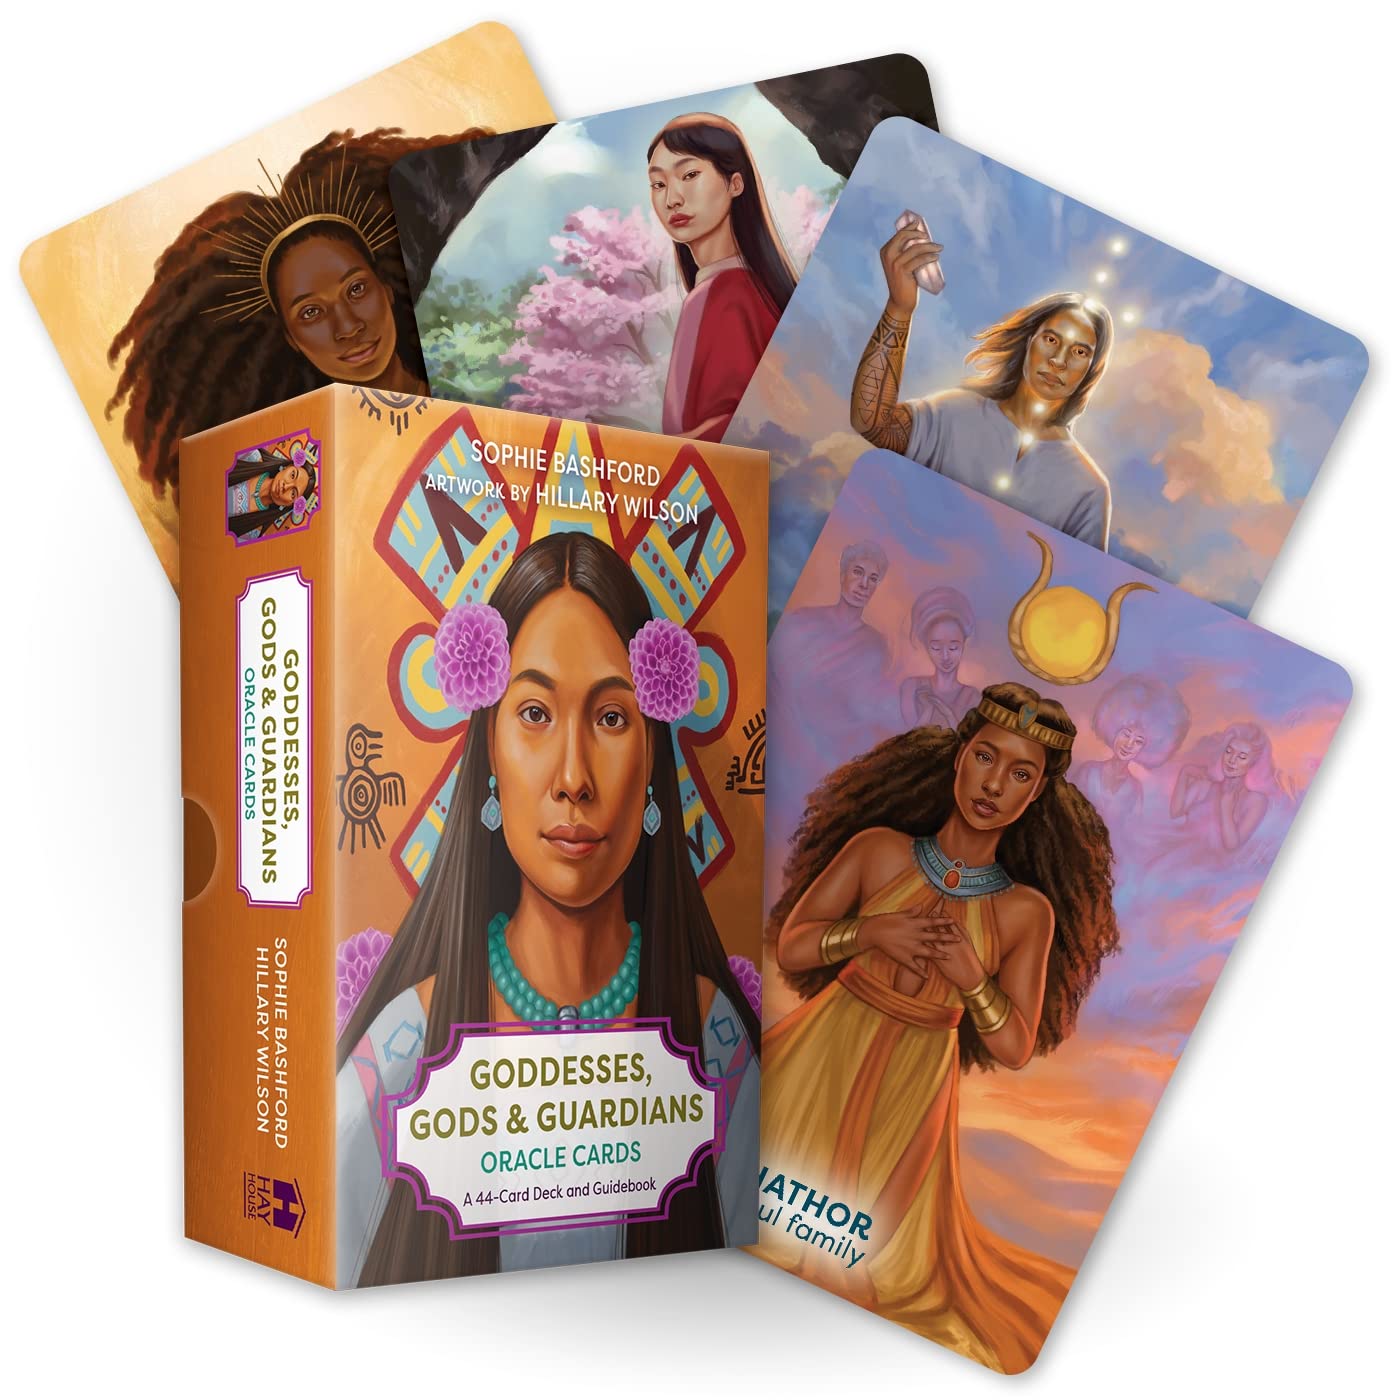 Goddesses, Gods and Guardians Oracle